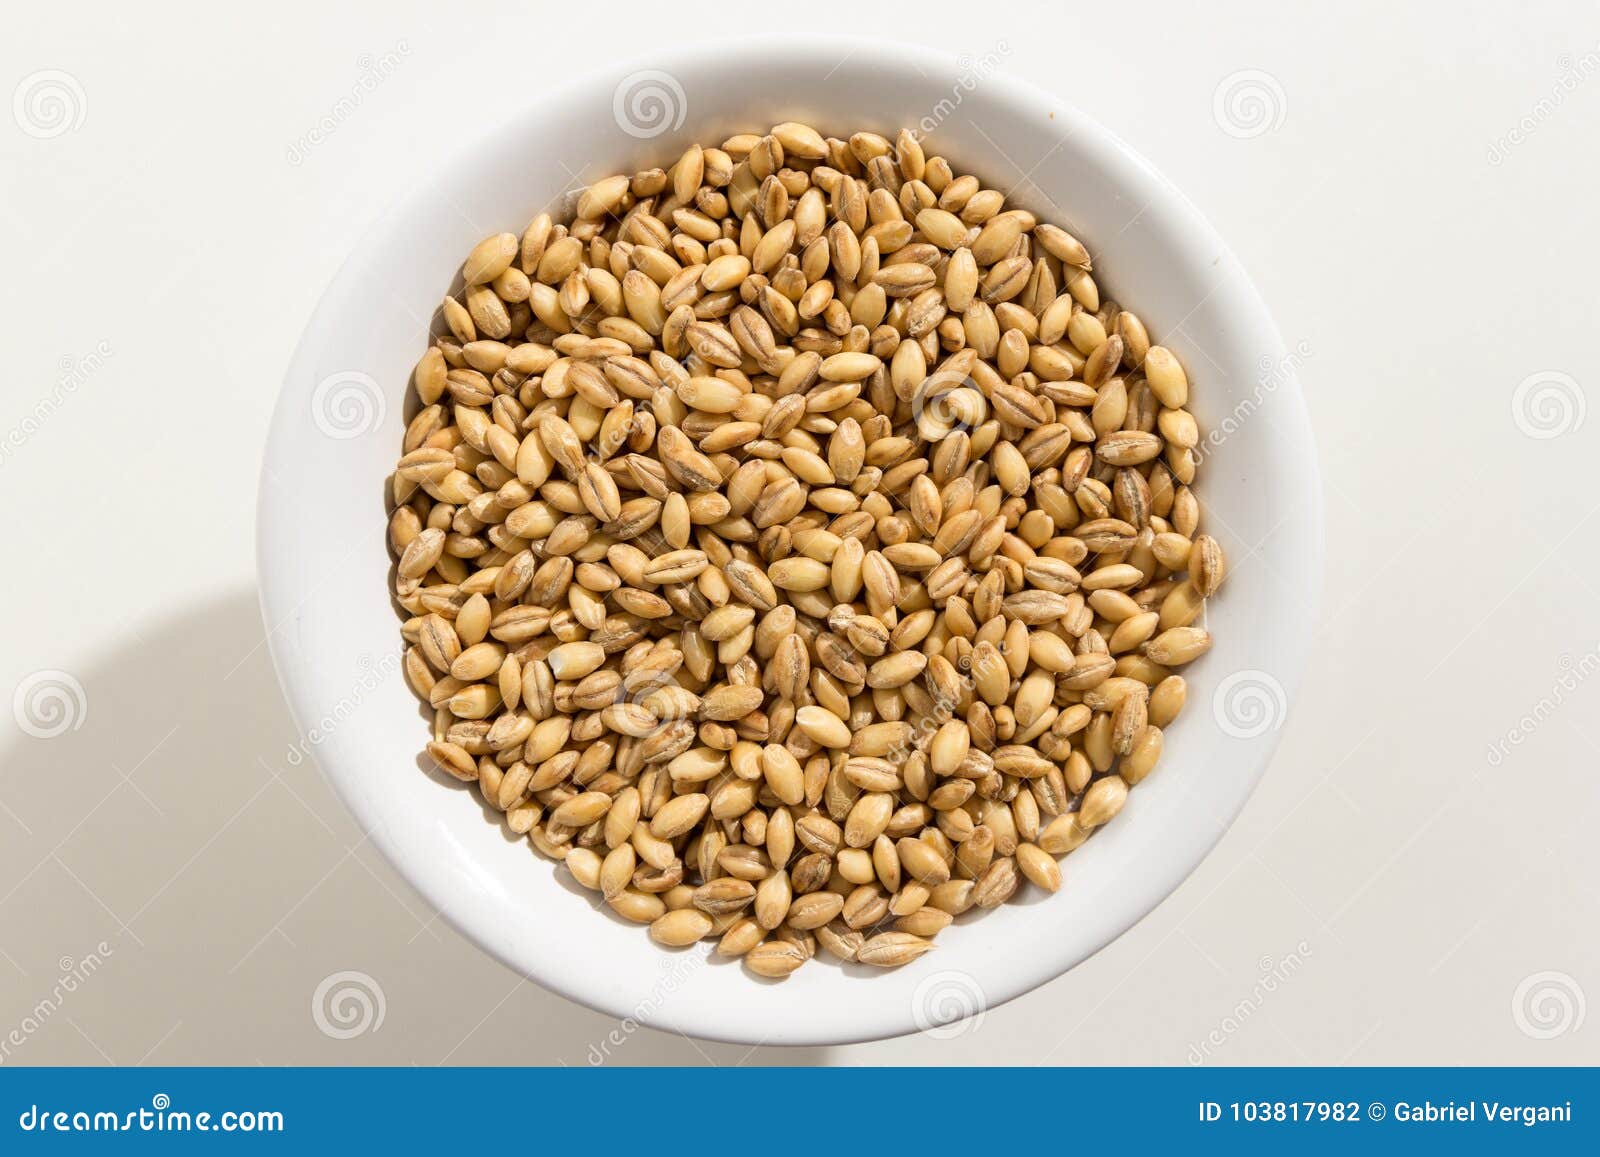 barley cereal grain. top view of grains in a bowl. white background.